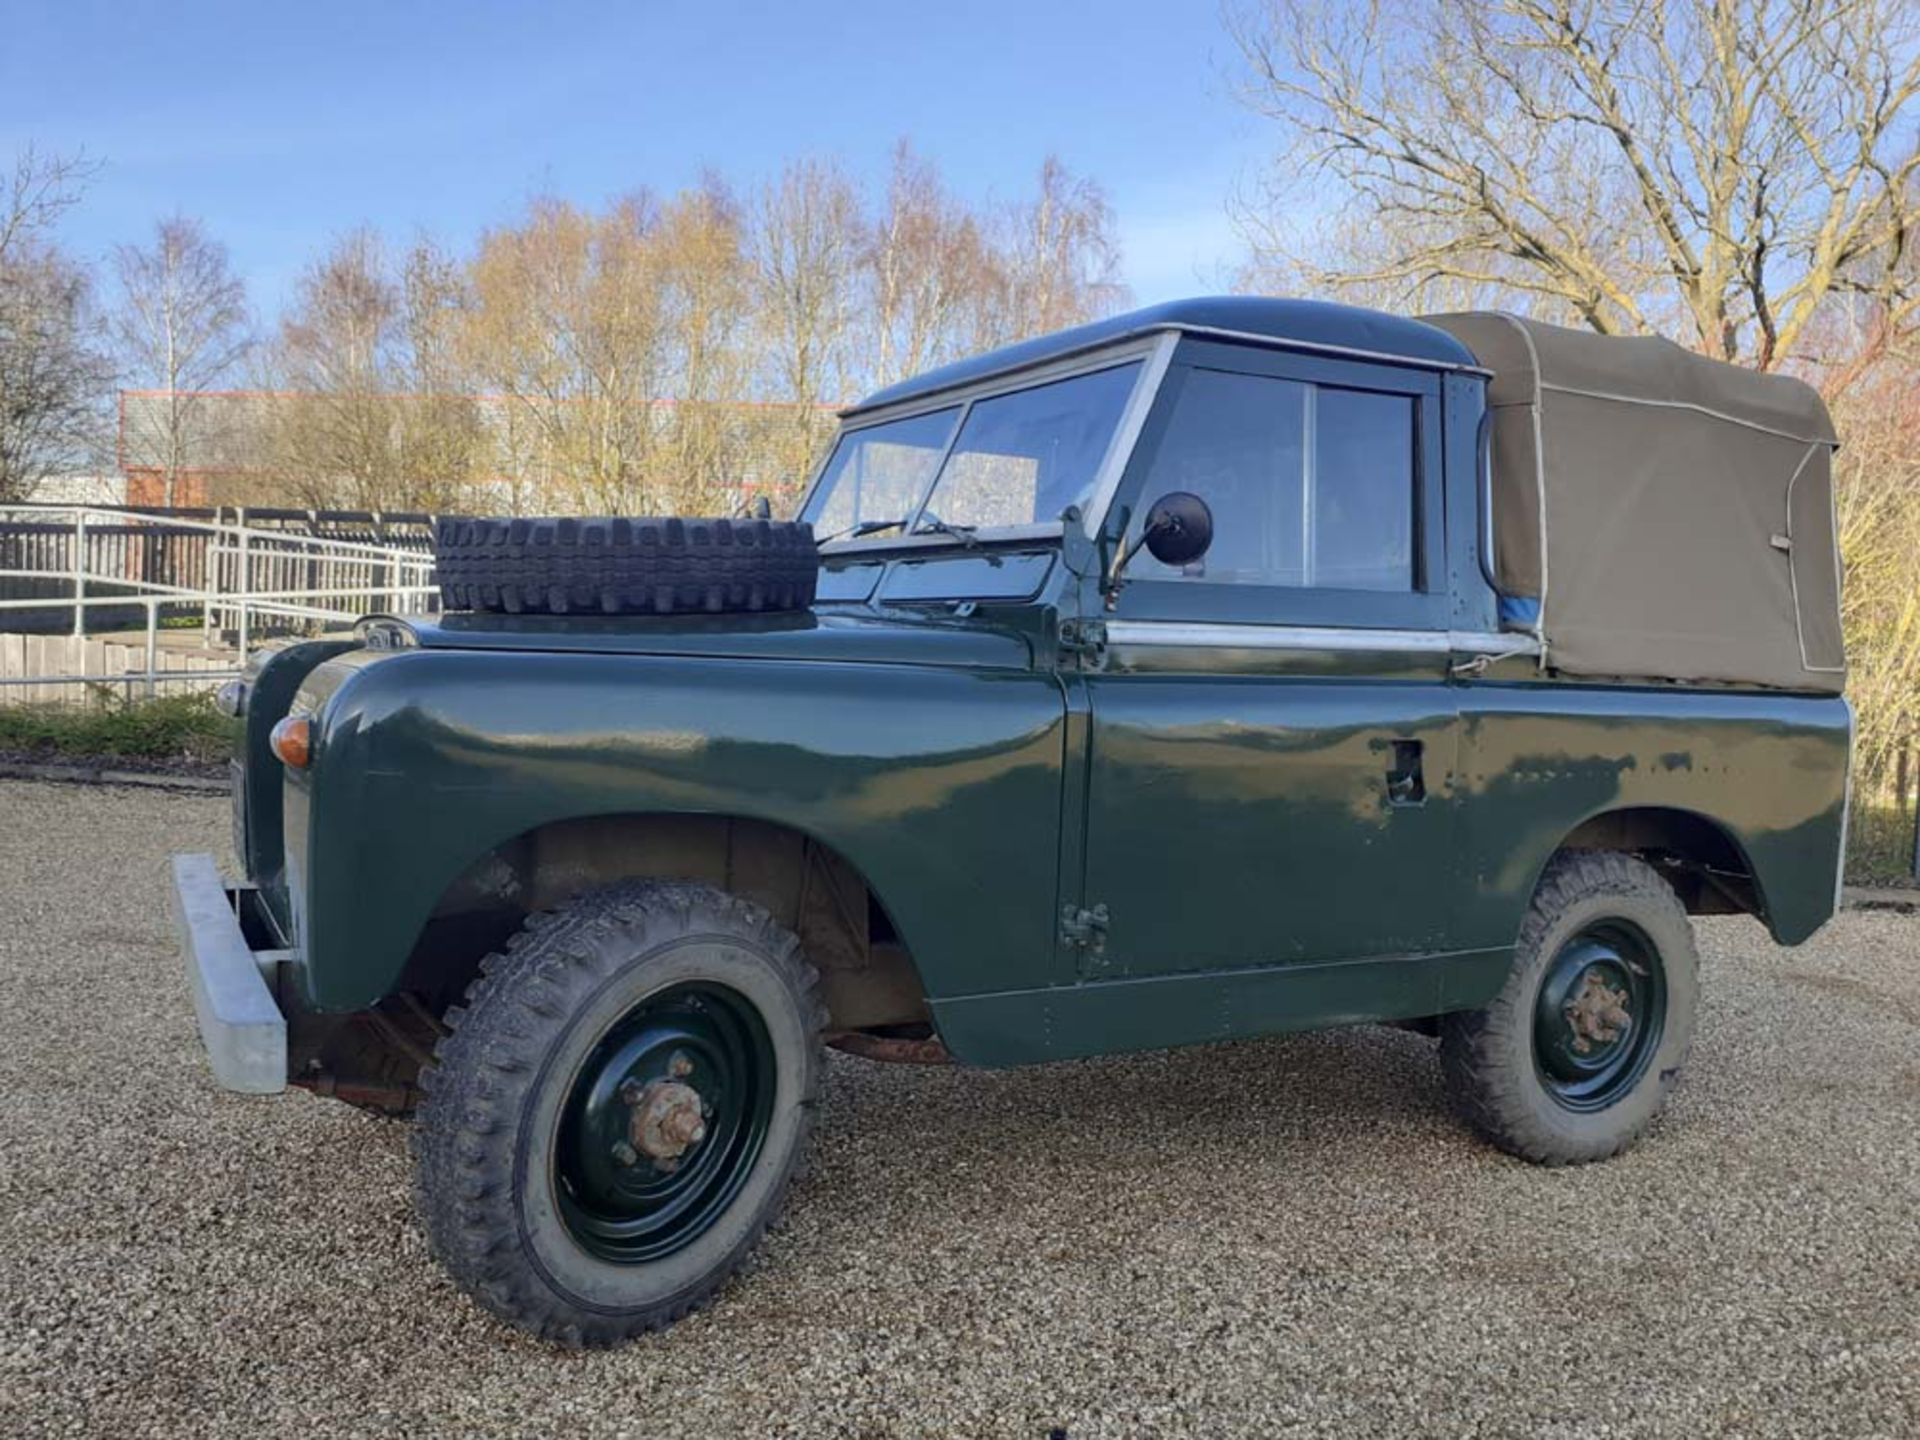 UYM 60F (1968) Land Rover Series 2A 88 inch (SWB) first registered 15/05/1968, chassis no. - Image 3 of 16